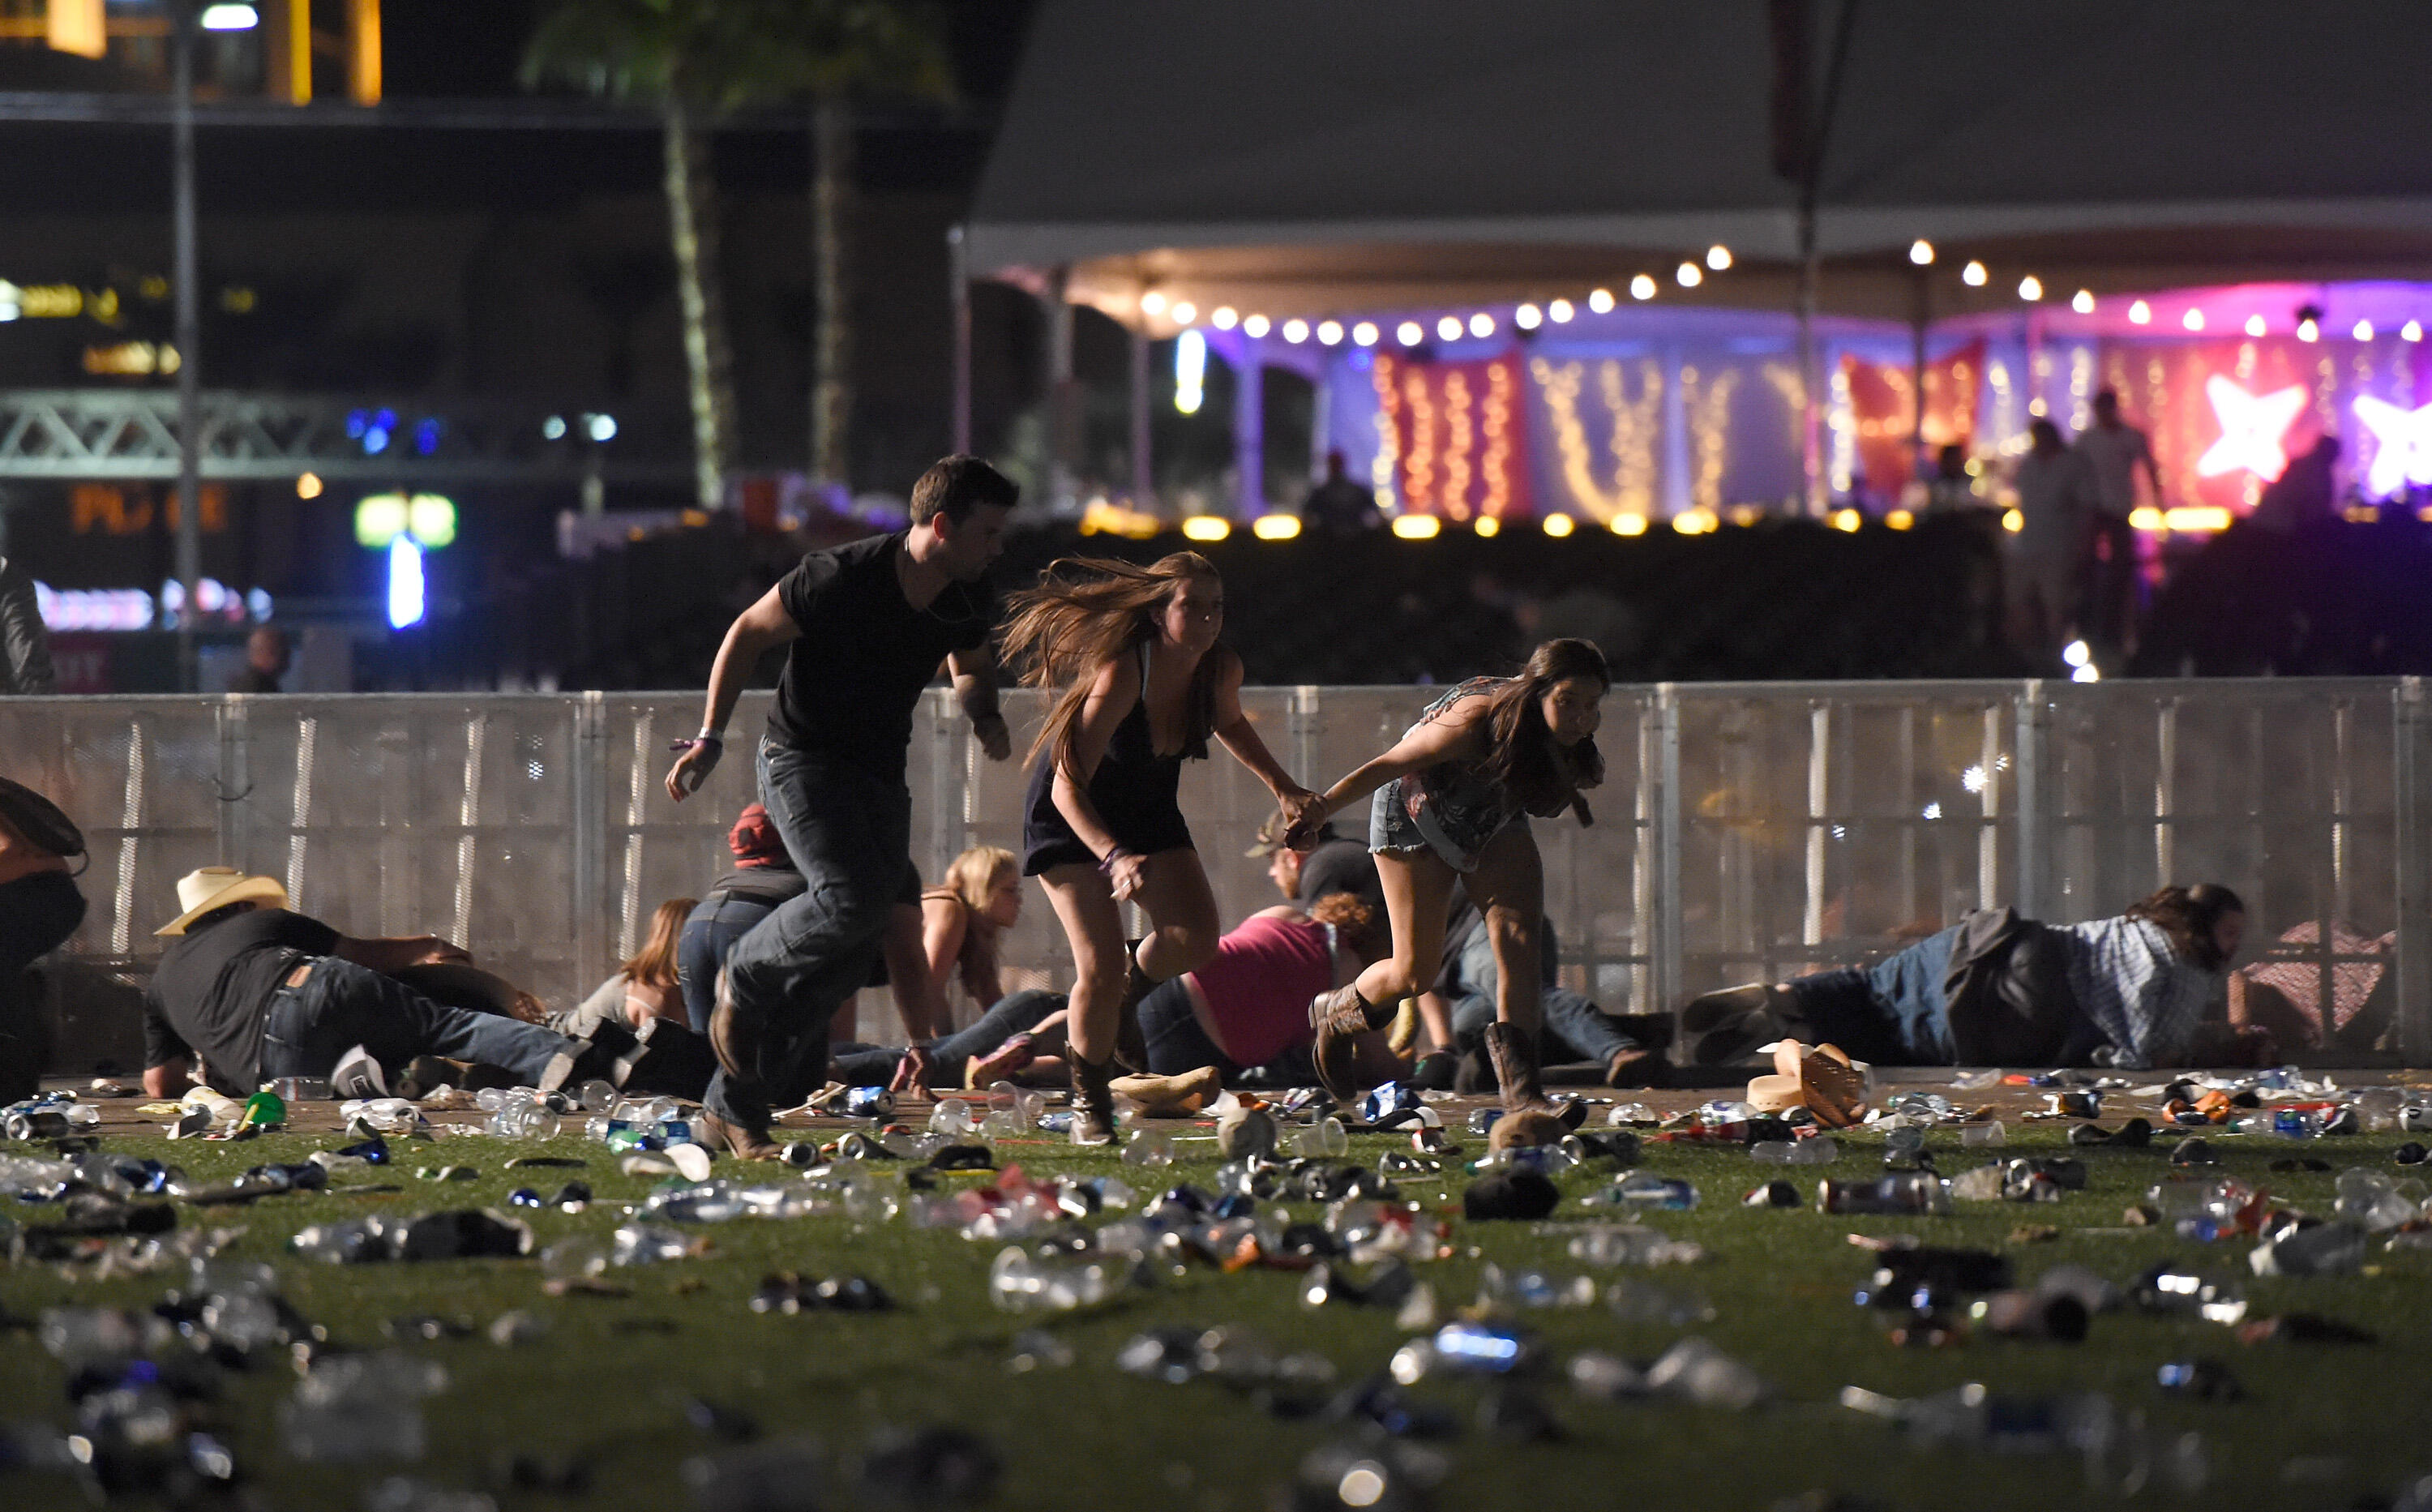 LAS VEGAS, NV - OCTOBER 01 People run from the Route 91 Harvest country music festival after the apparent gunfire was heard on October 1, 2017, in Las Vegas, Nevada. There are reports of an active shooter around the Mandalay Bay Resort and Casino. (Photo by David Becker/Getty Images)